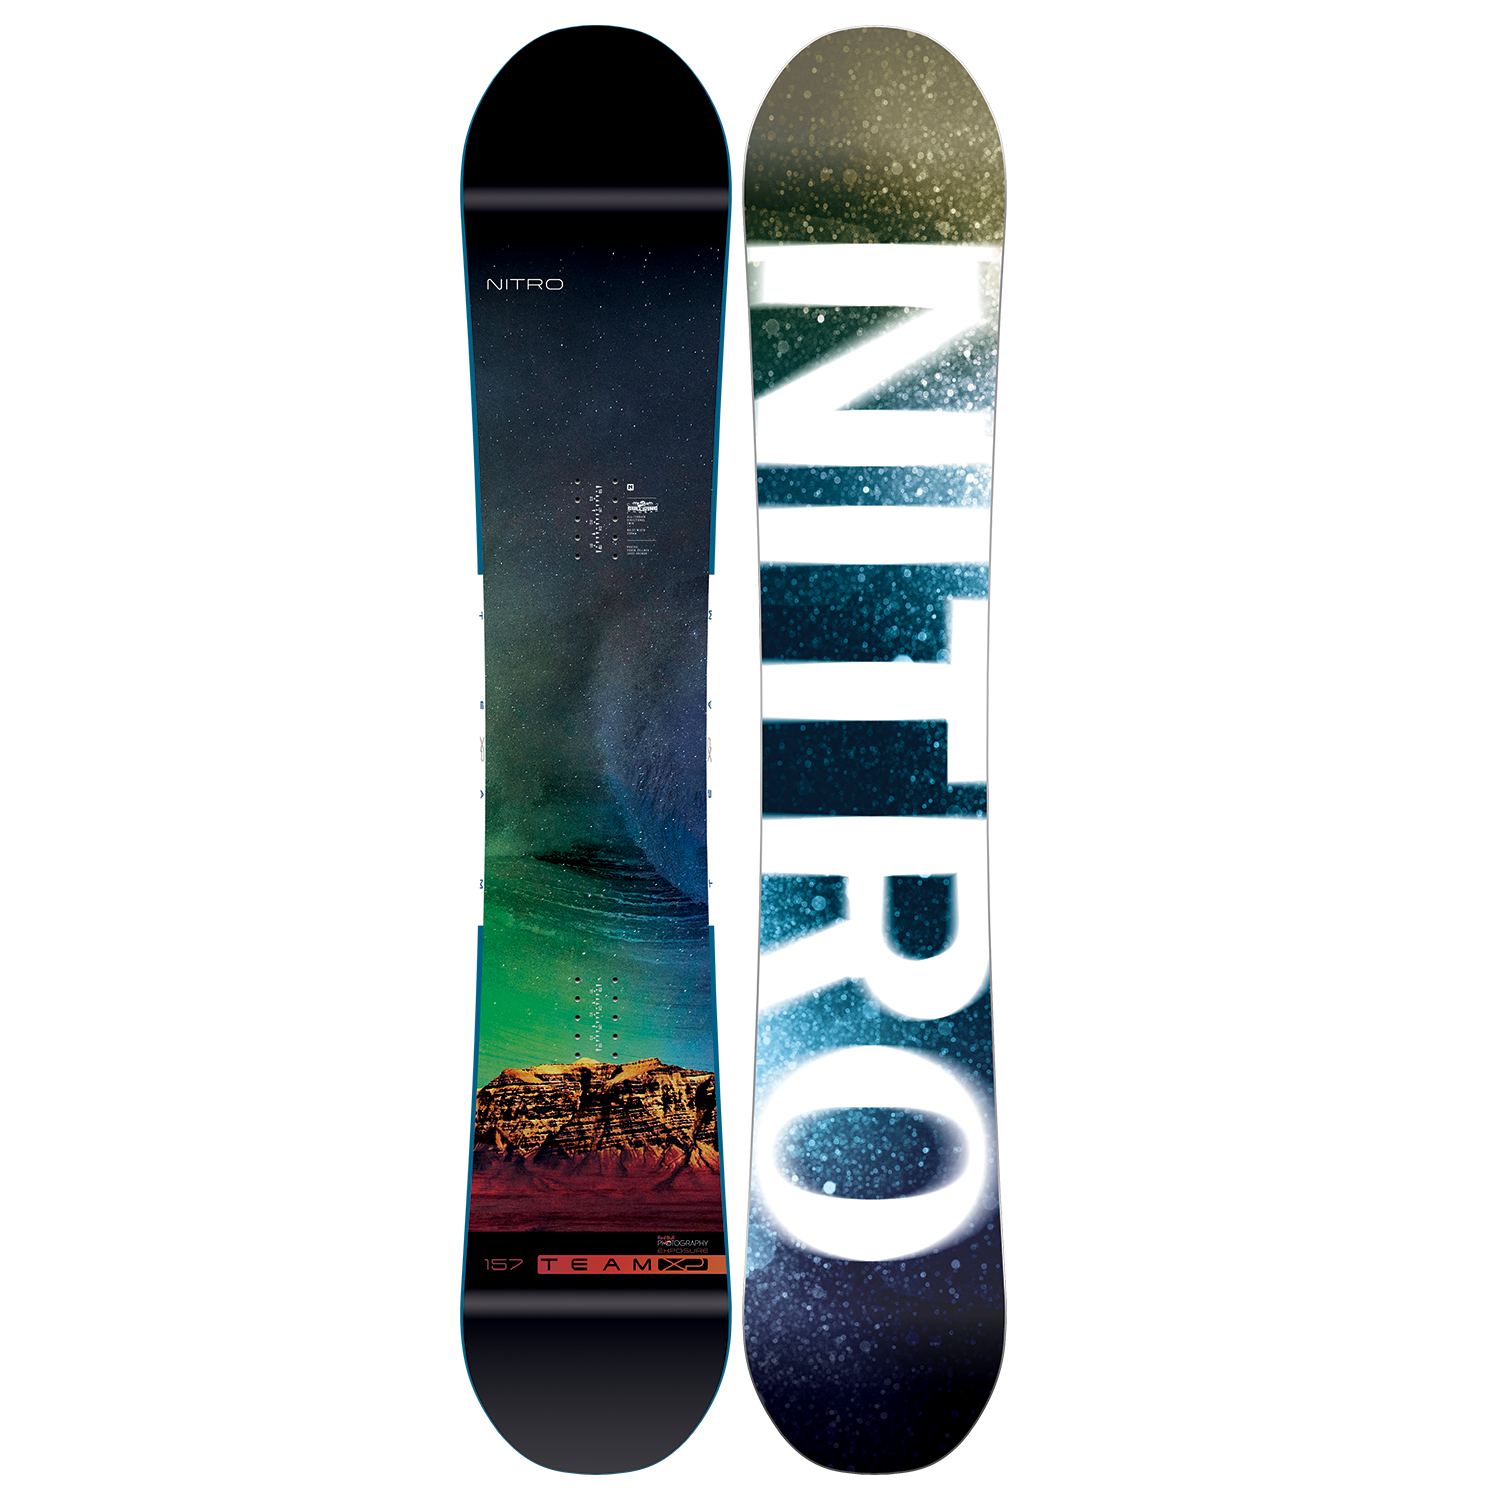 Boards -  nitro The Team Exposure Gullwing